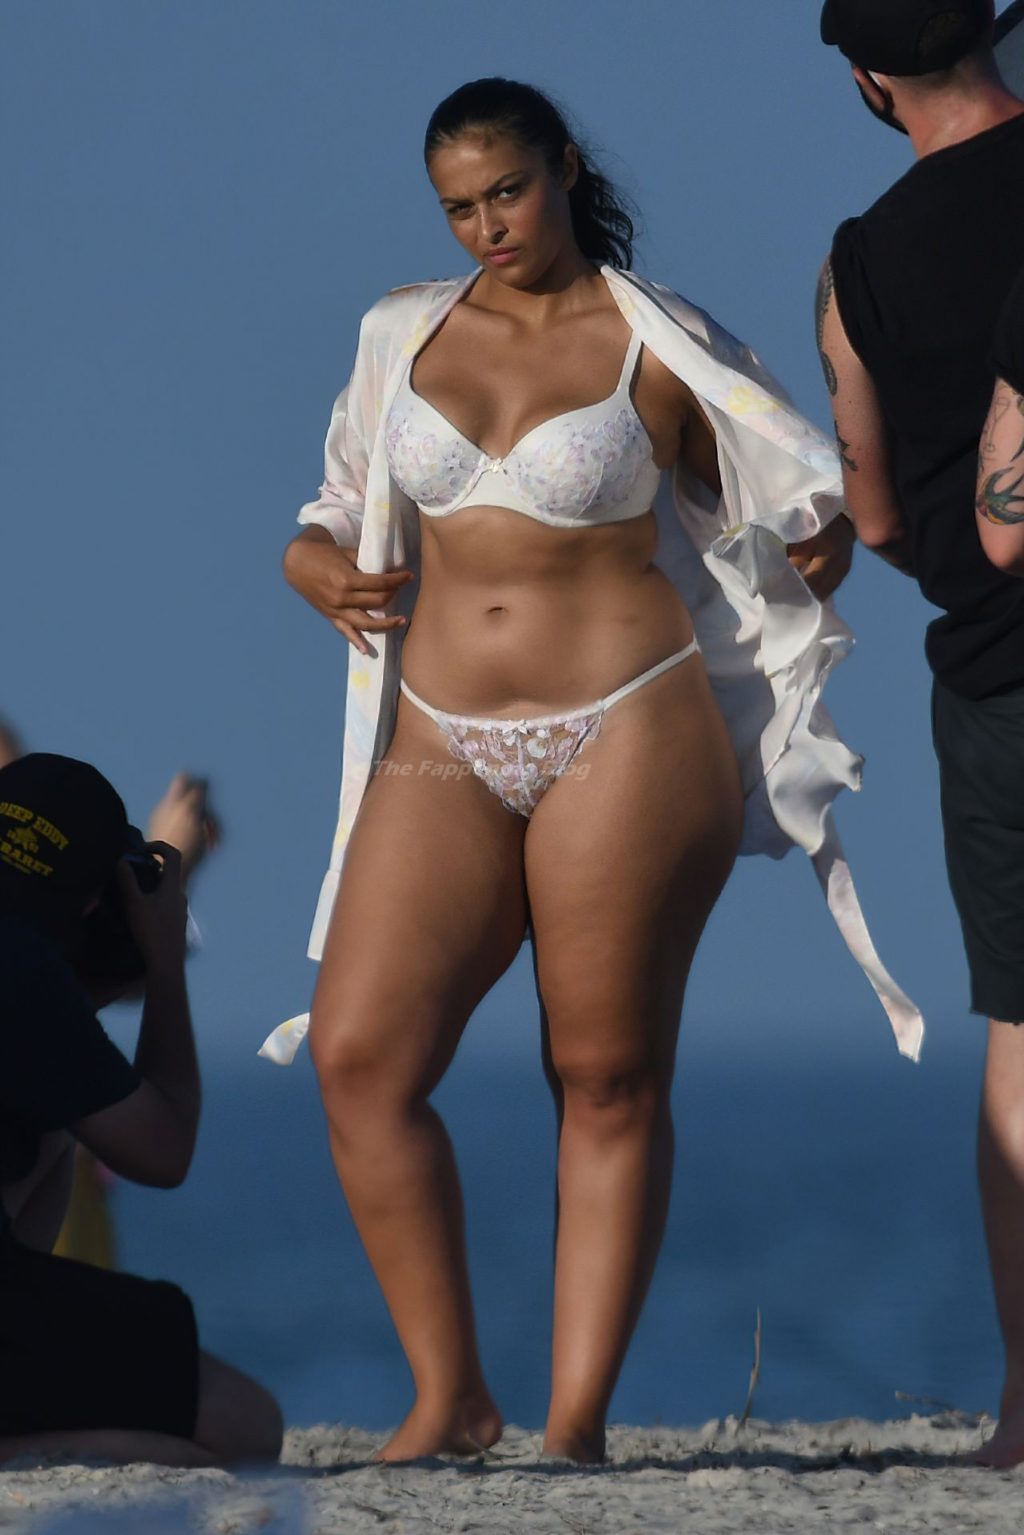 Devyn Garcia Poses in Lingerie During a Victoria’s Secret Photoshoot on the Beach in Miami (37 Photos)